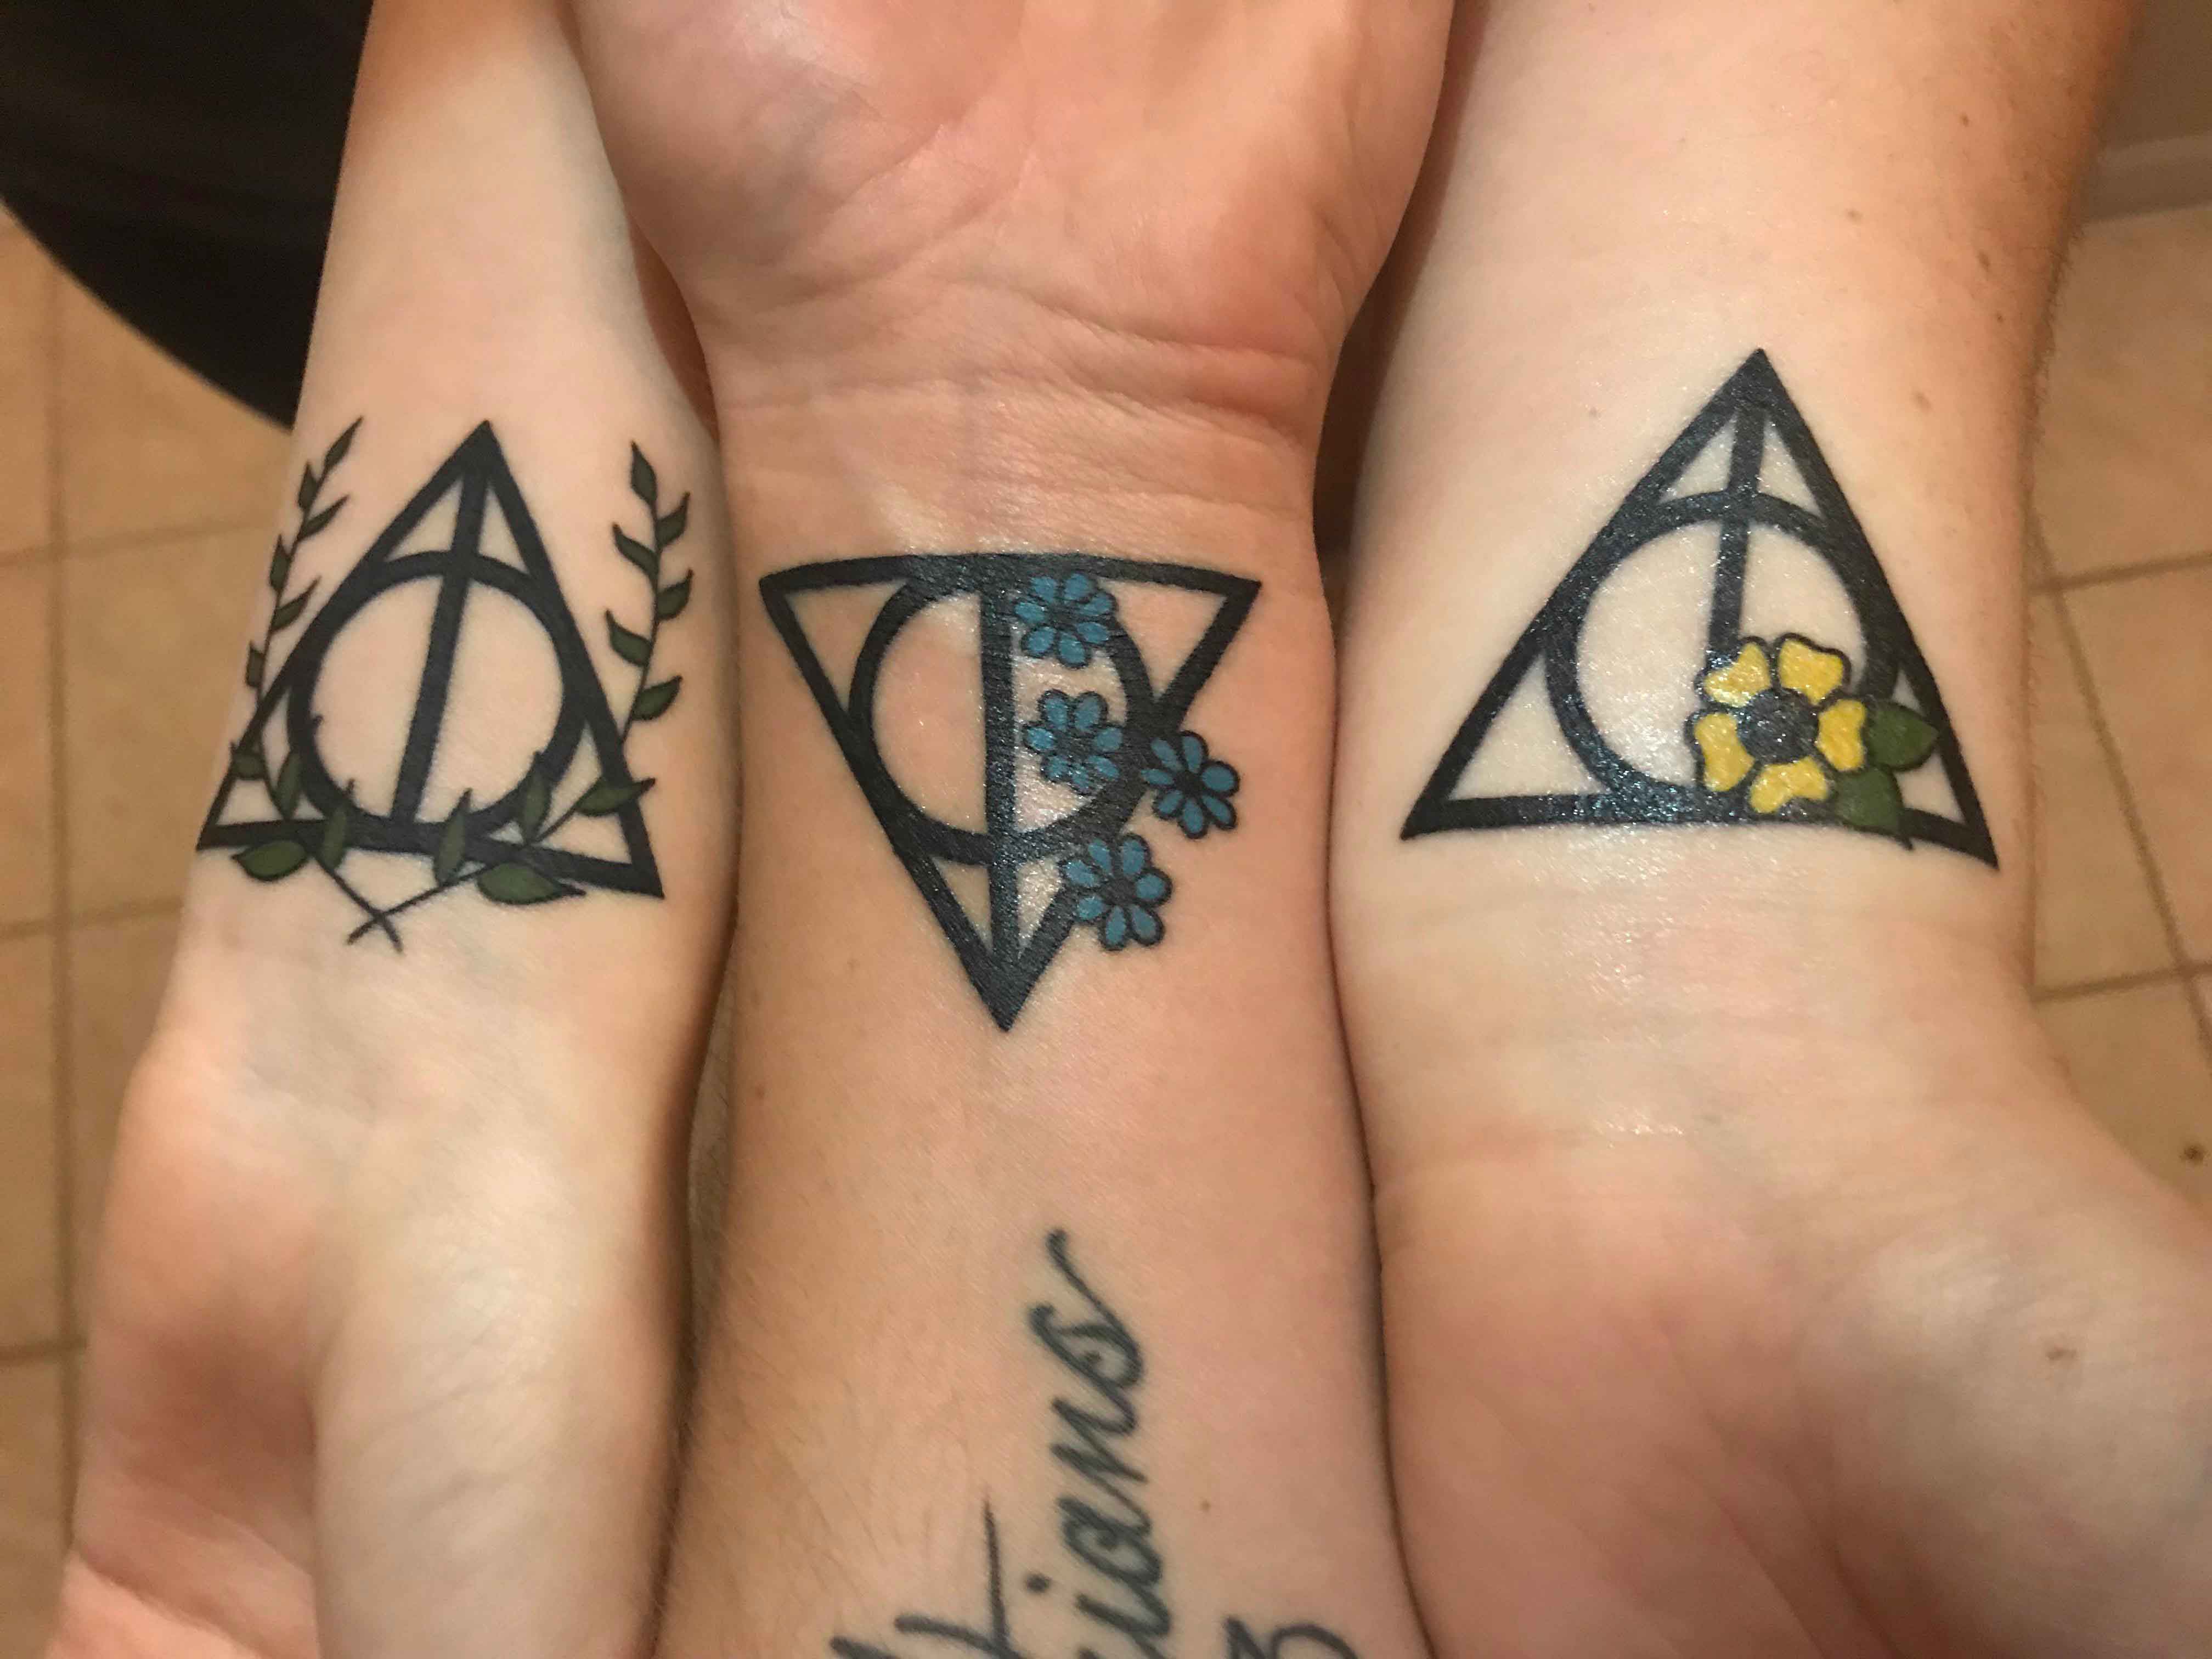 6. "Watercolor Deathly Hallows tattoo" - wide 5